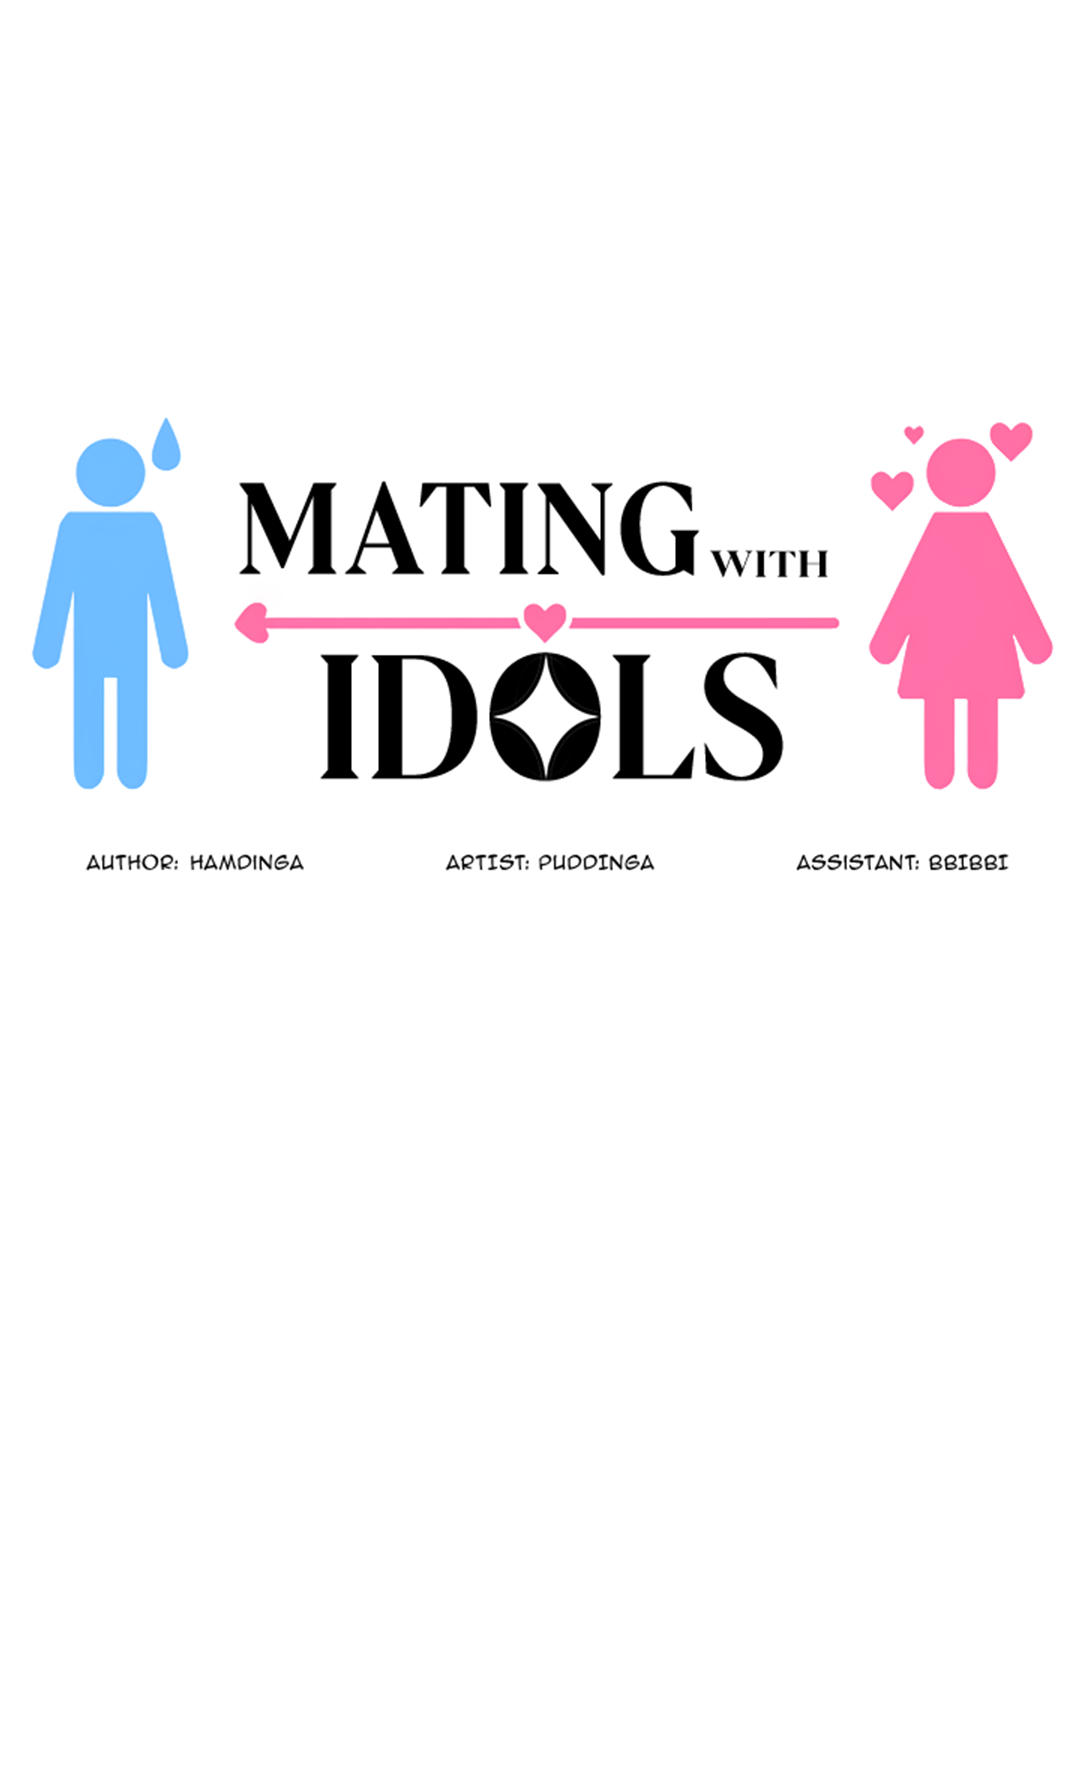 Mating with Idols NEW image